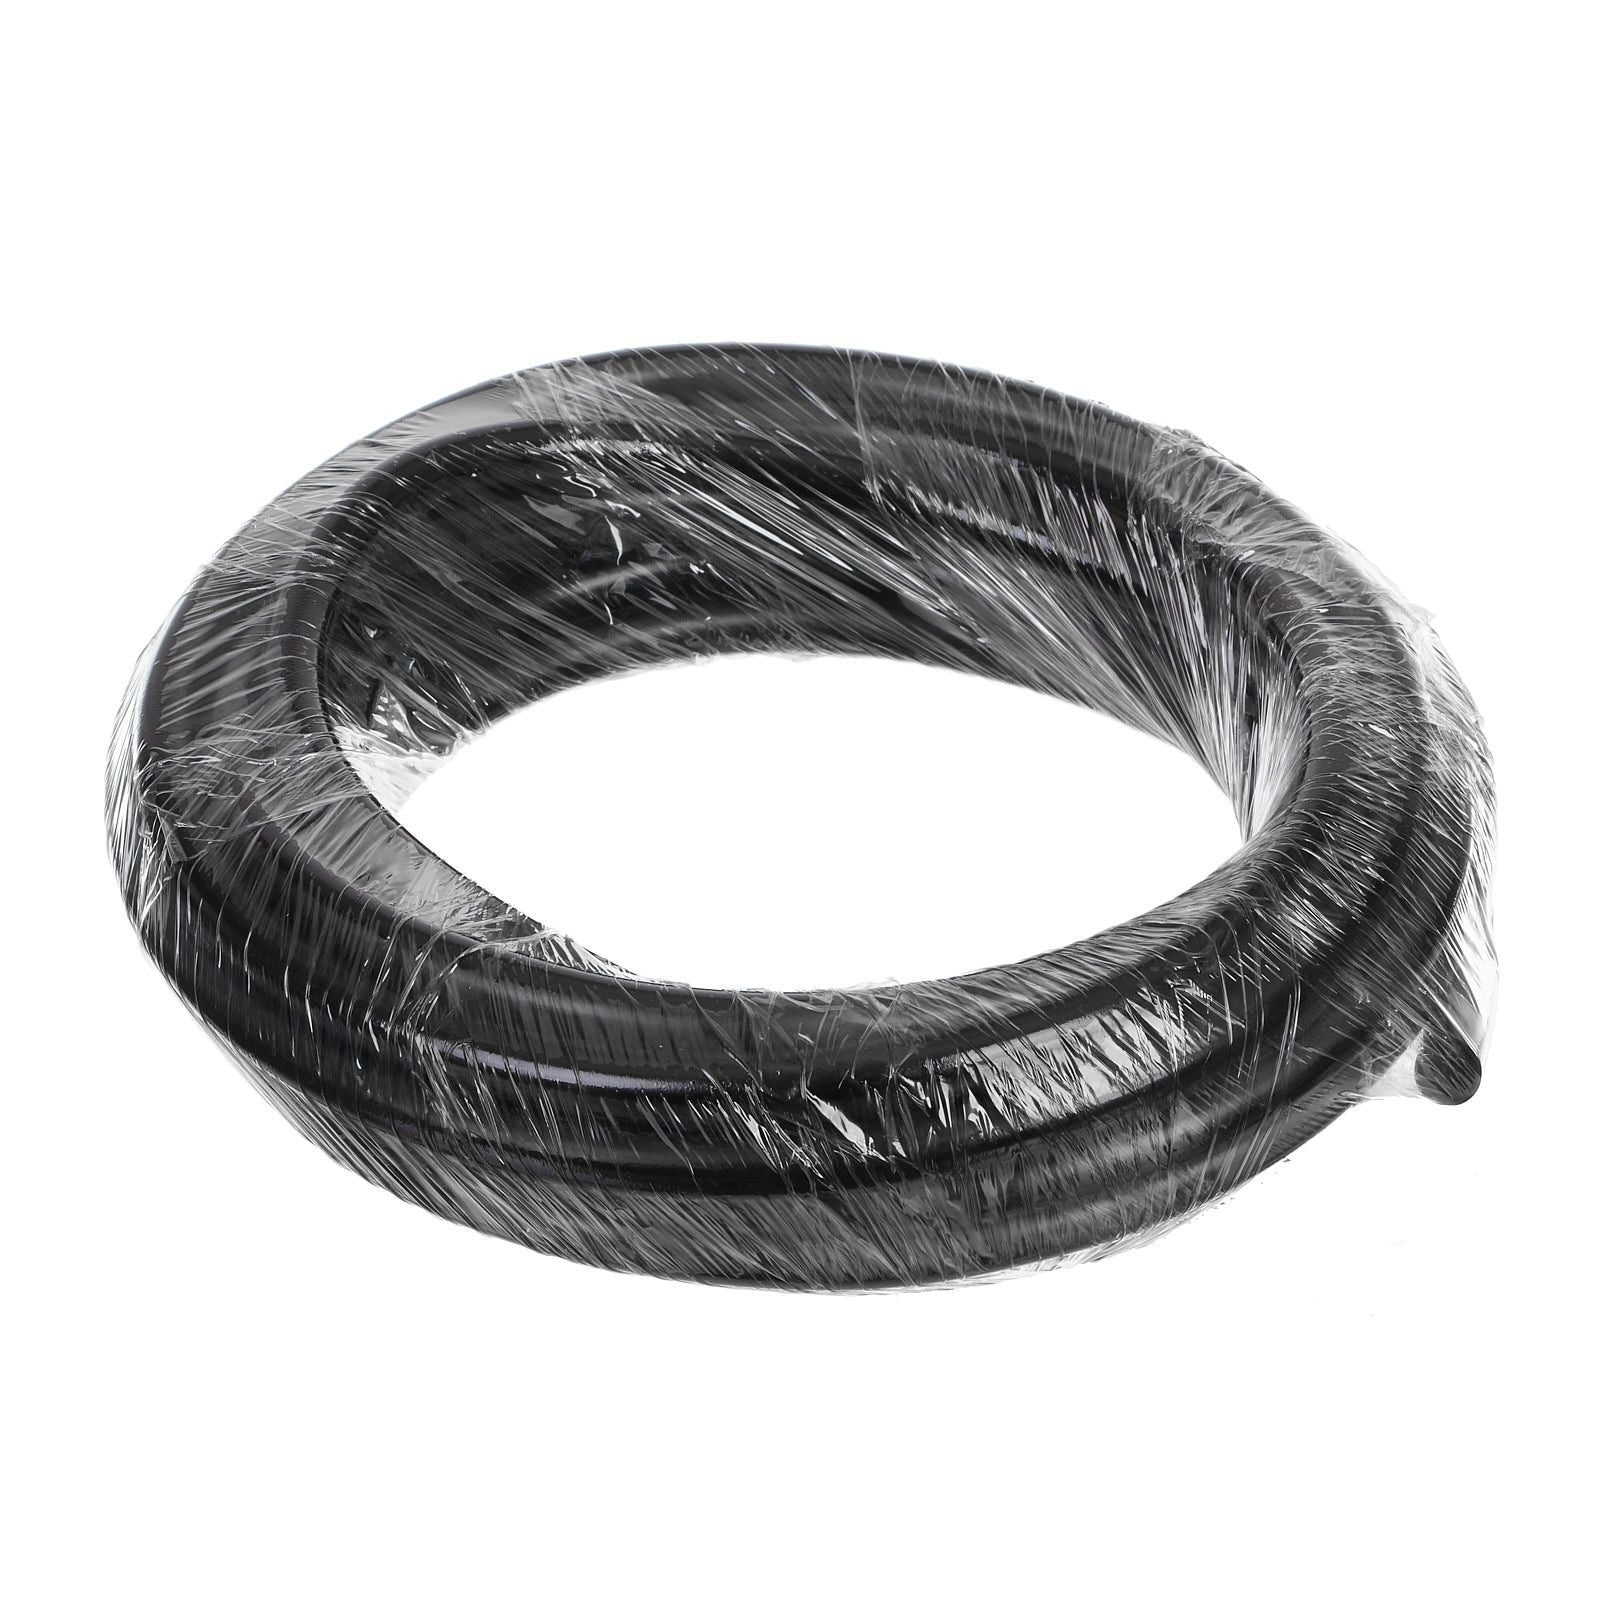 New WHITES Fuel Hose - 6mm (1/4) Blk (25Ft Roll / 7.6M)-Not Efi #WPFH6